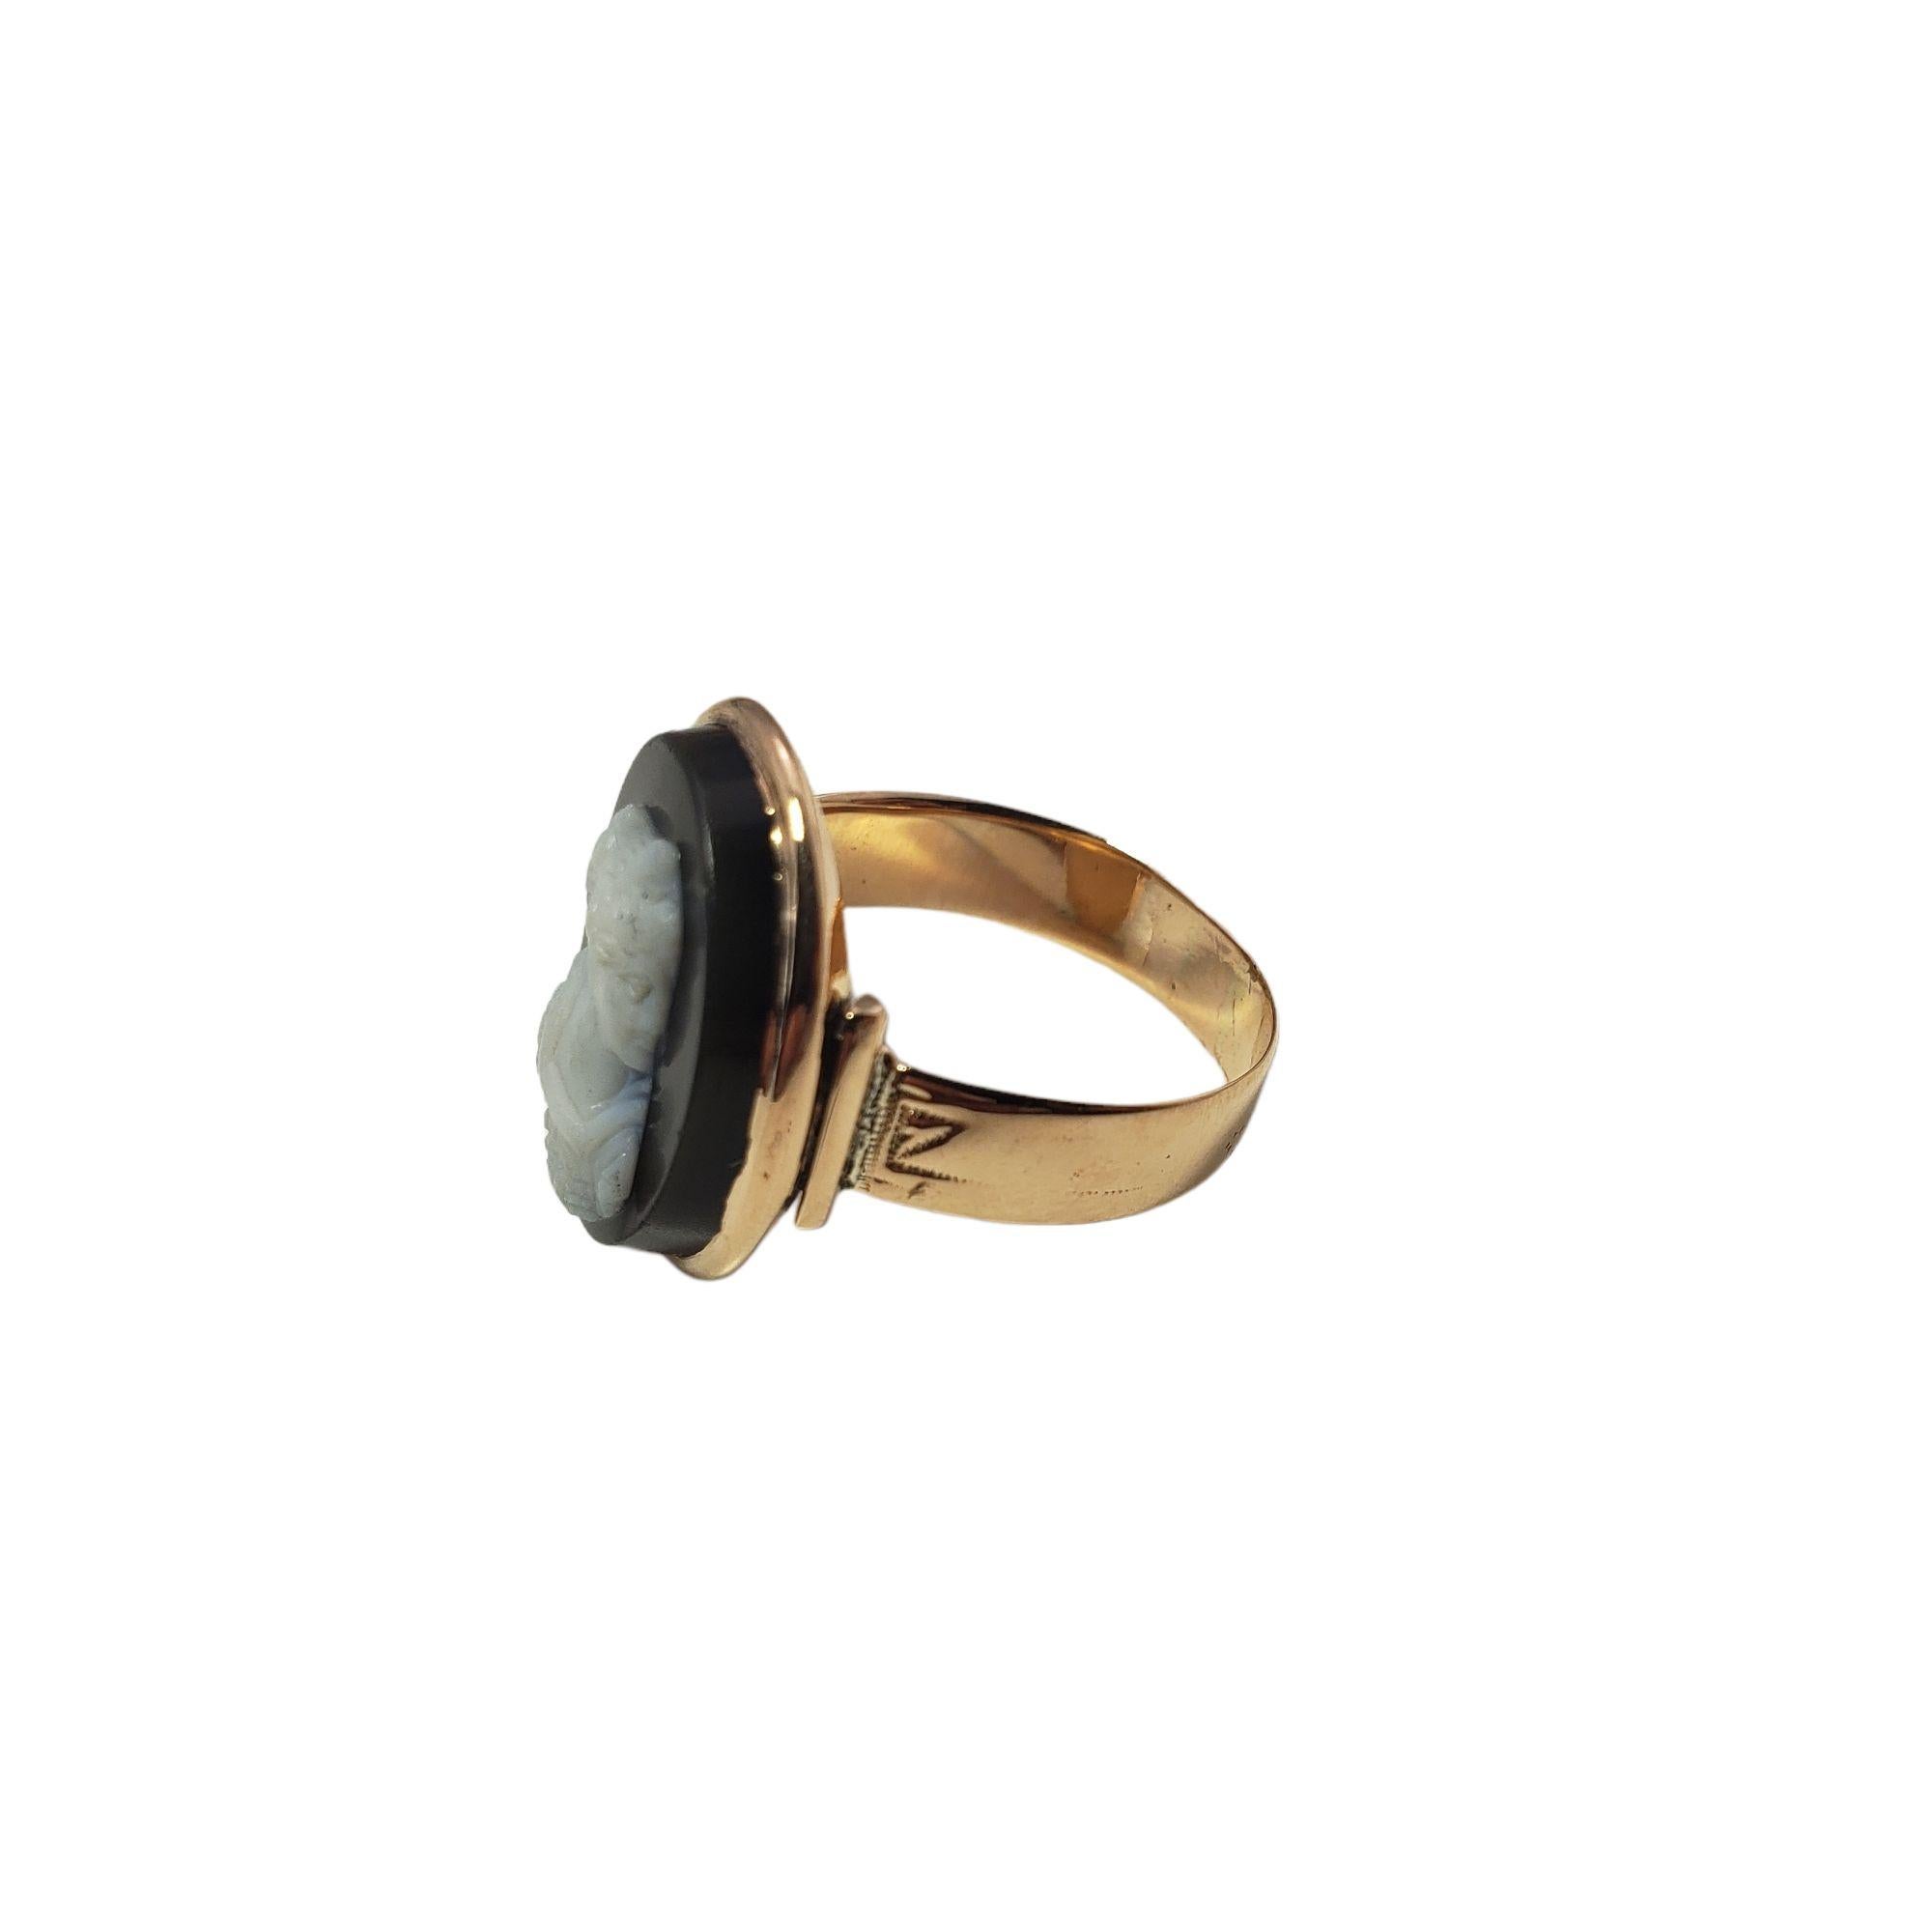 Vintage 10 Karat Yellow Gold Black Cameo Ring Size 7-

This elegant black cameo ring features a lovely lady in profile set in 10K yellow gold. Width: 19 mm. Shank: 4 mm.

Ring Size: 7

Weight: 1.4 dwt. / 2.3 gr.

Tested 10K gold.

Very good